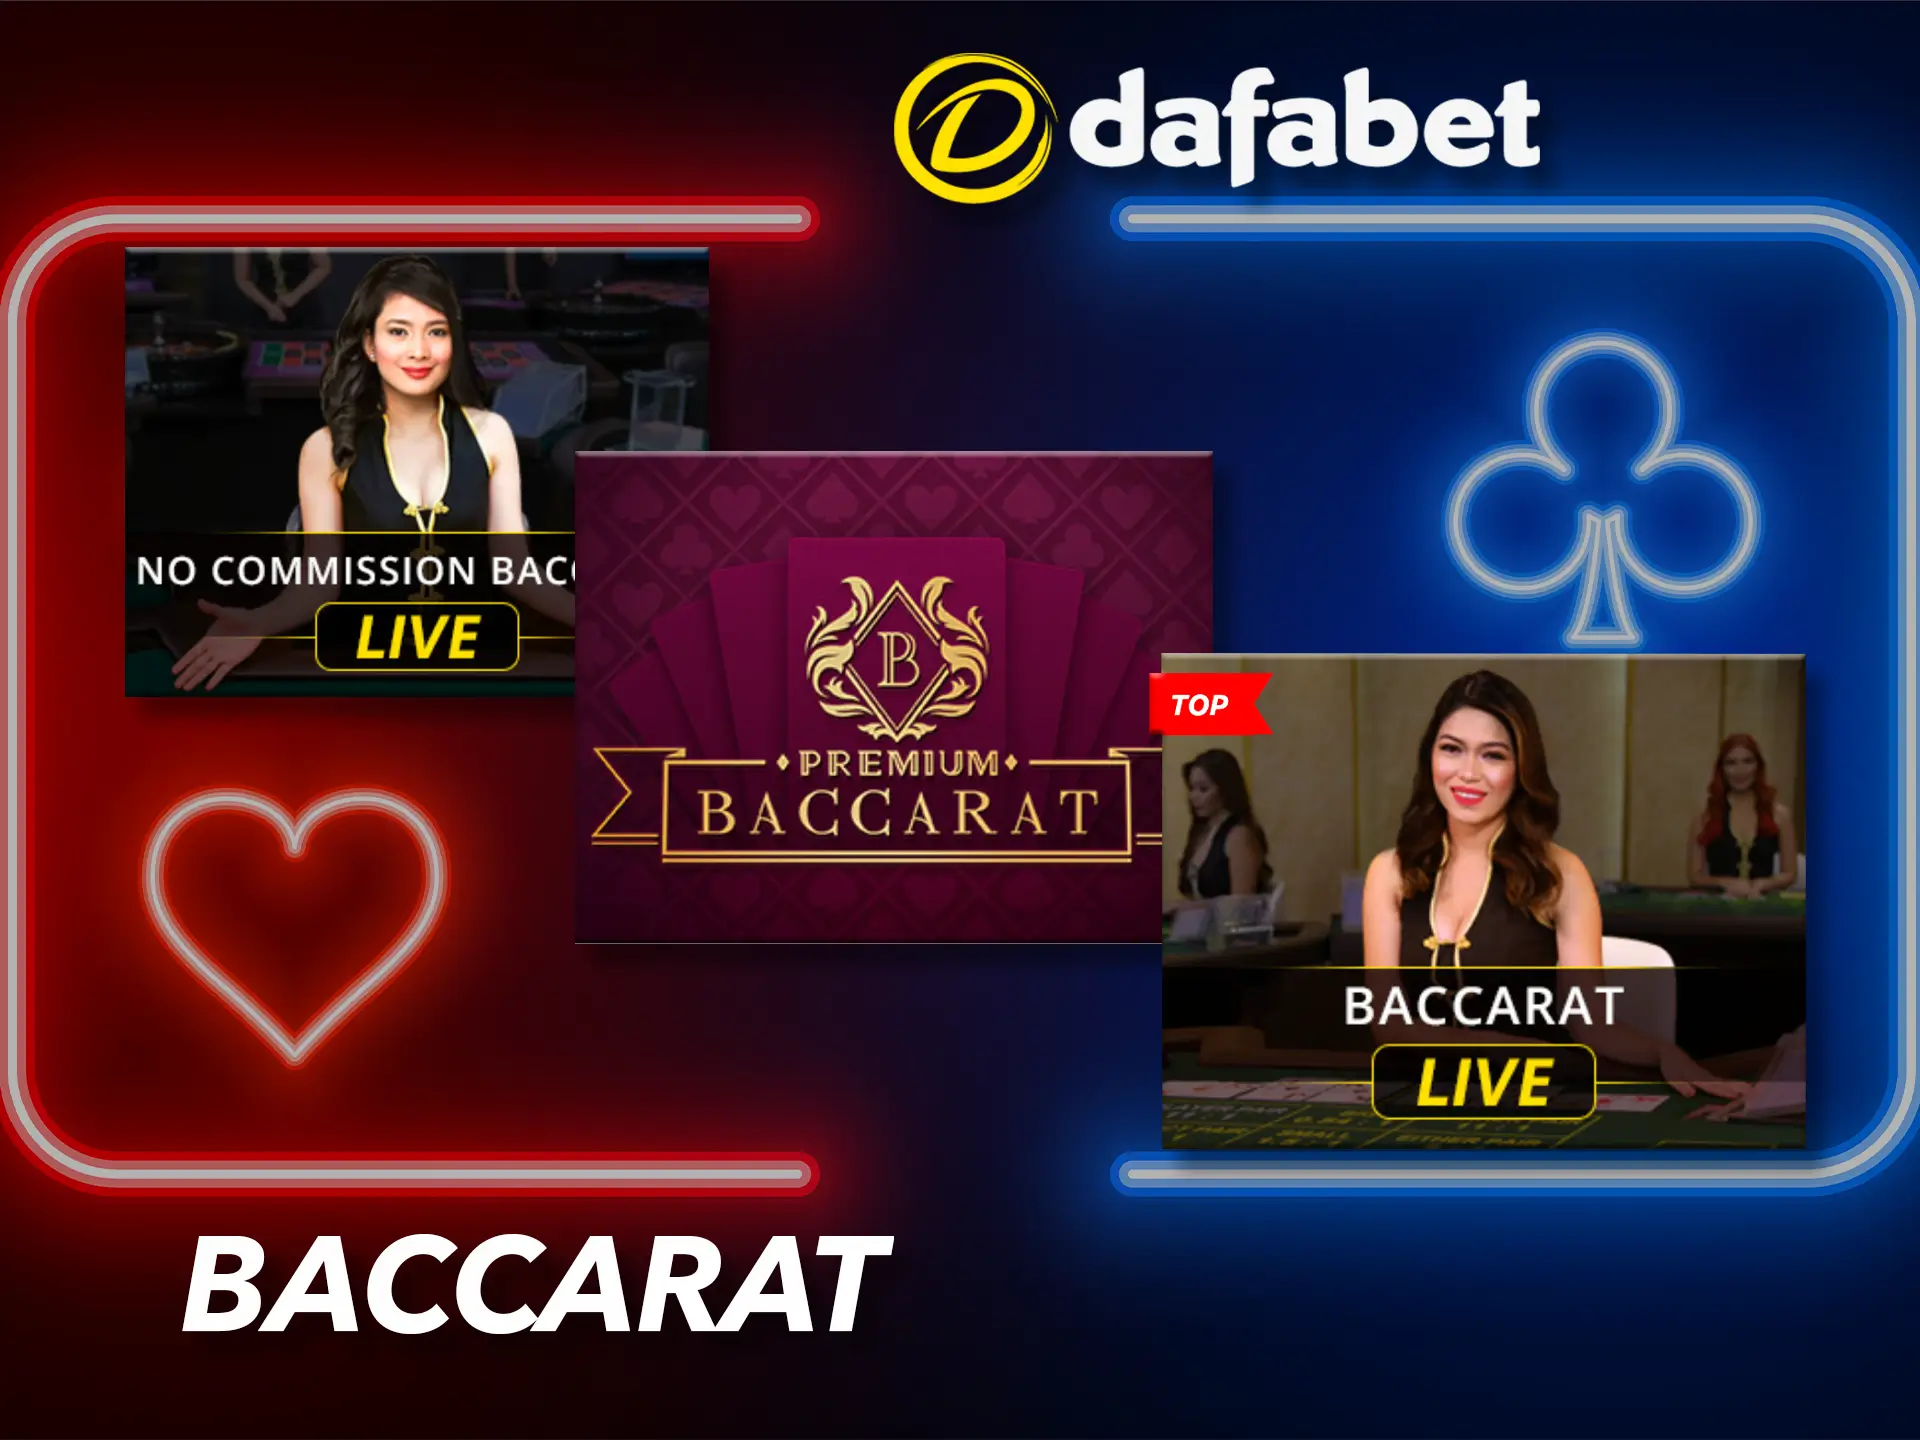 You can find the best combinations in Dafabet's Baccarat.